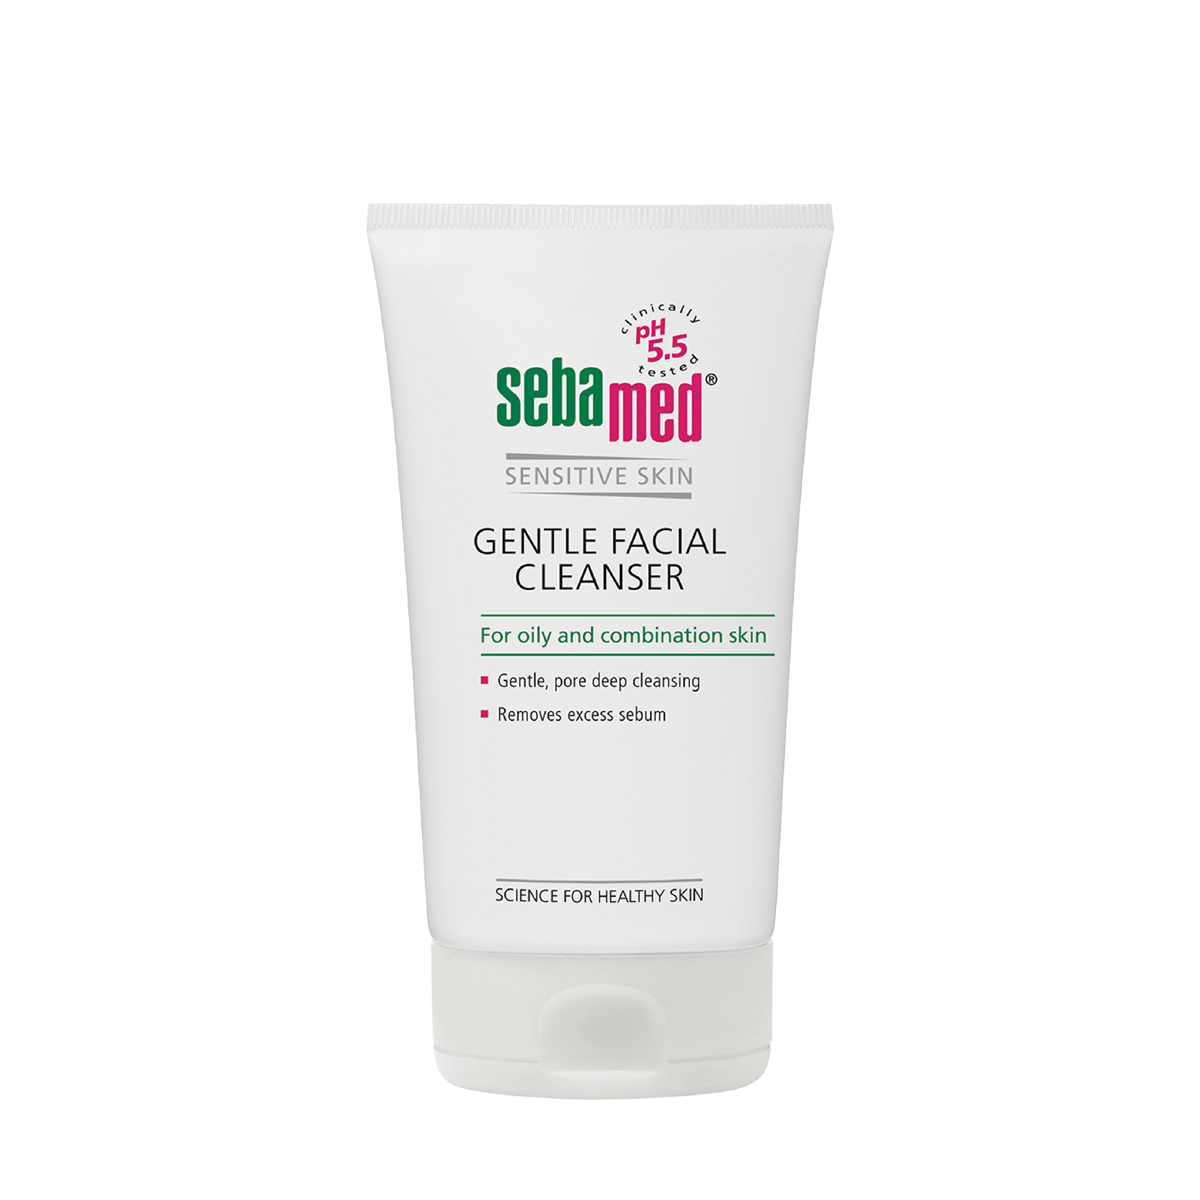 Sebamed Gentle Facial Cleanser For Oily and Combination Skin